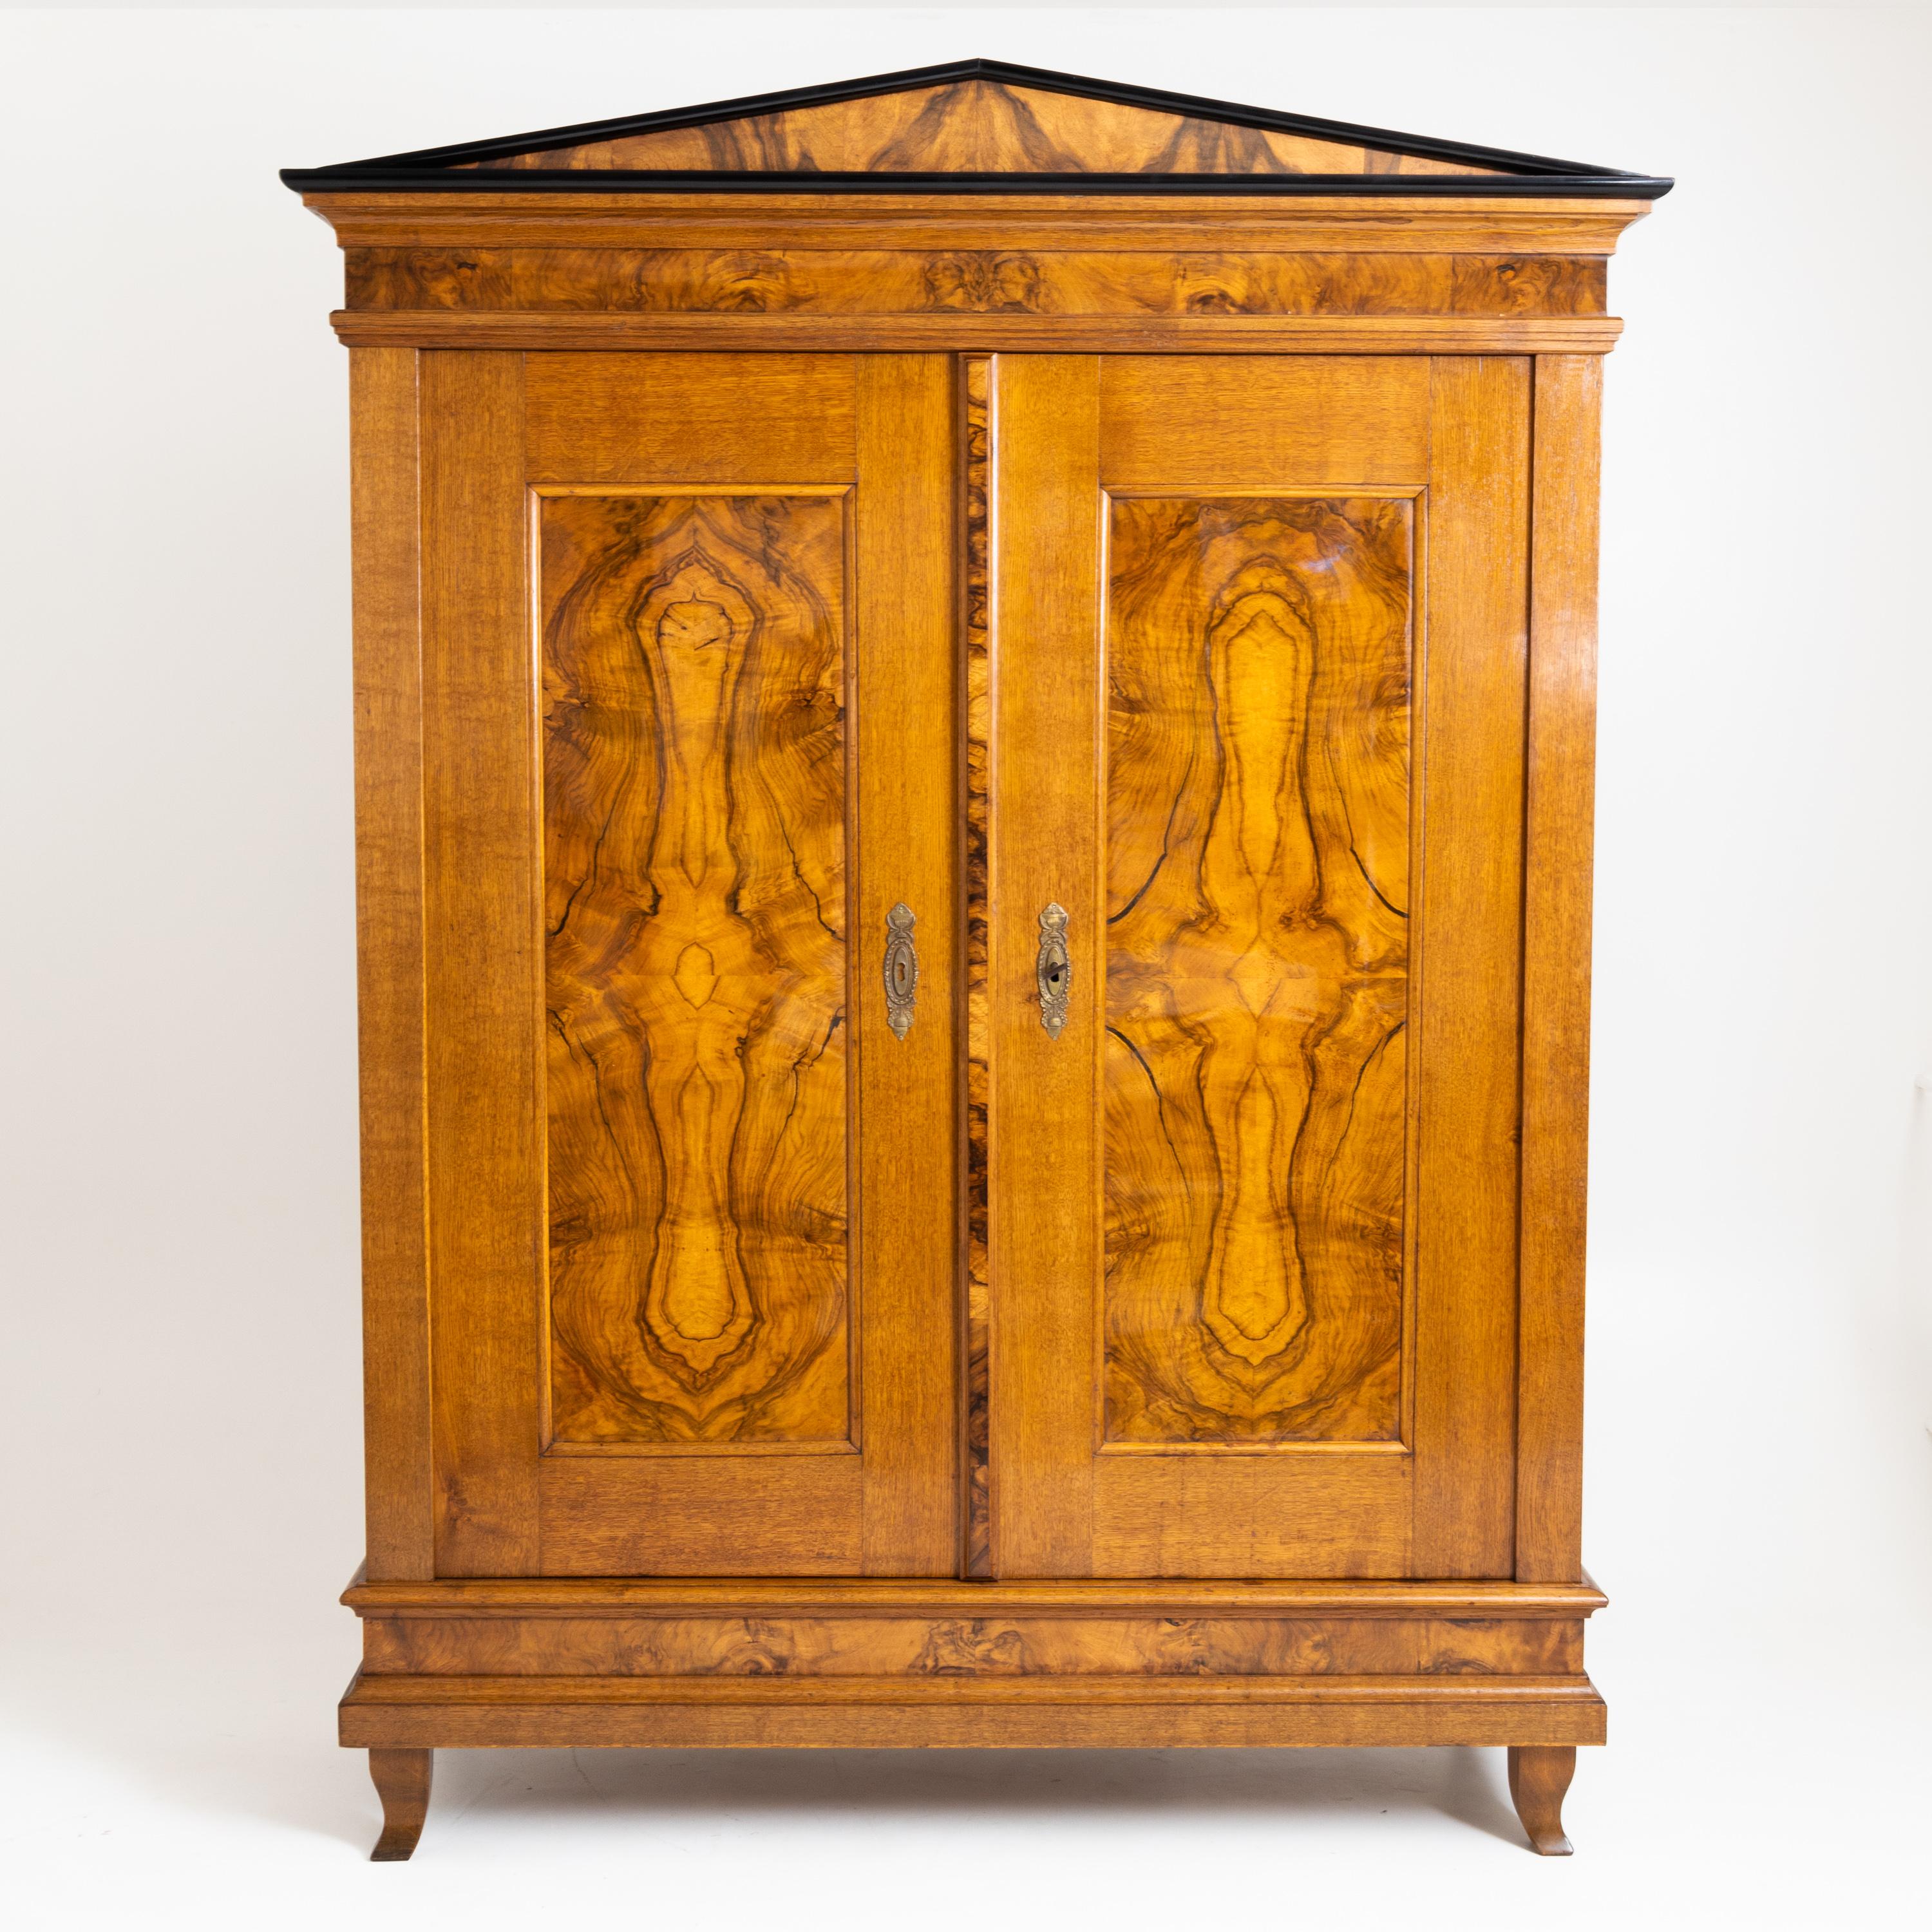 Large two-door wardrobe with walnut-veneered panels and oak body. The cornice in classicist design with ebonized mouldings around the tympanum field. The flap moulding is also veneered in walnut on the top. The sides of the body are coffered like